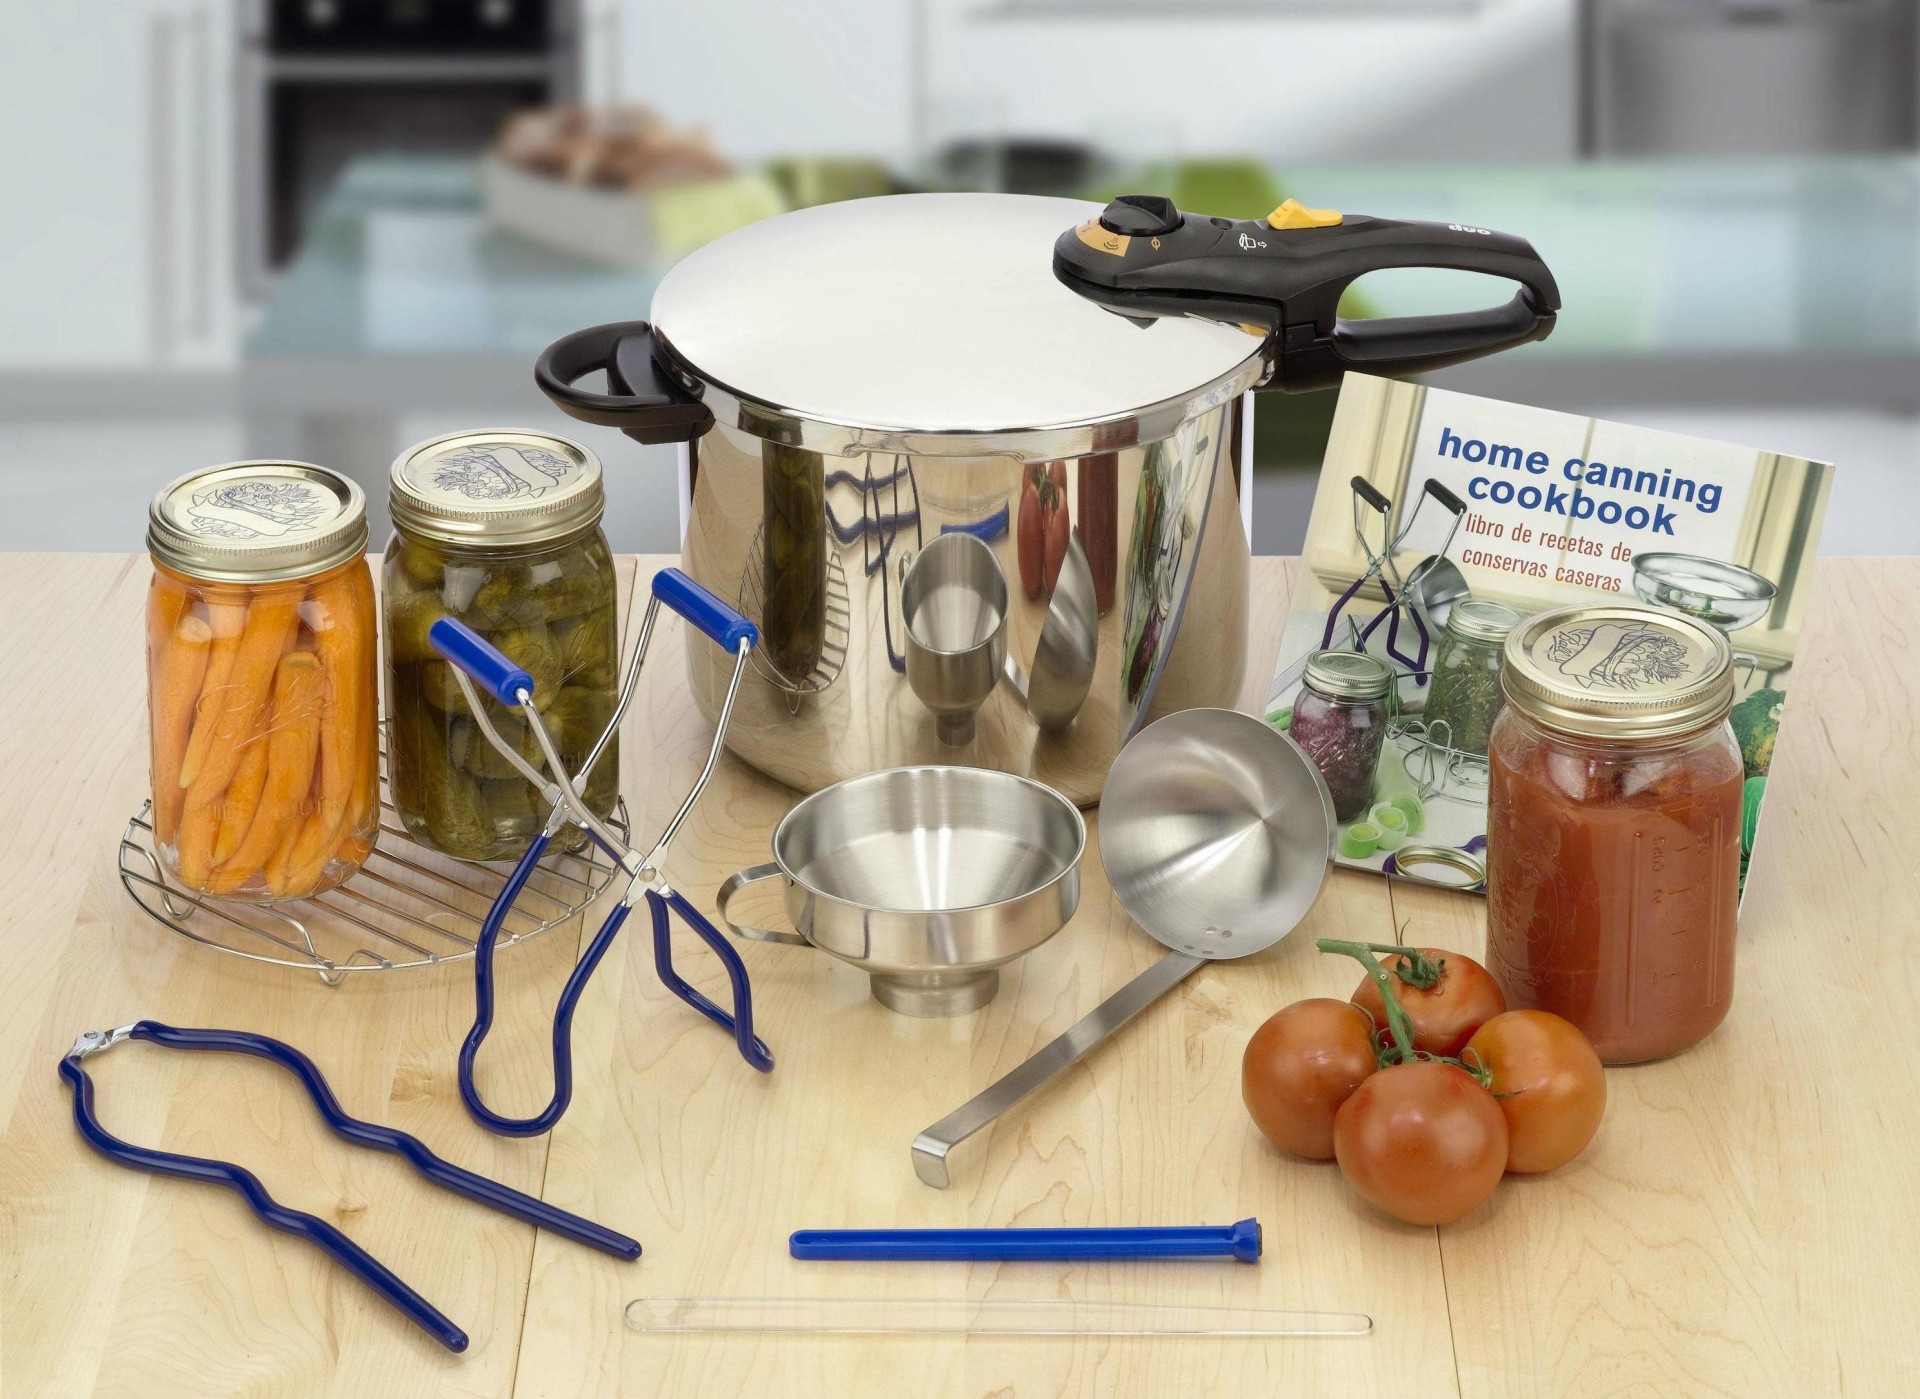 9 Piece Home Pressure Canning Set Promotes Health & Well Being